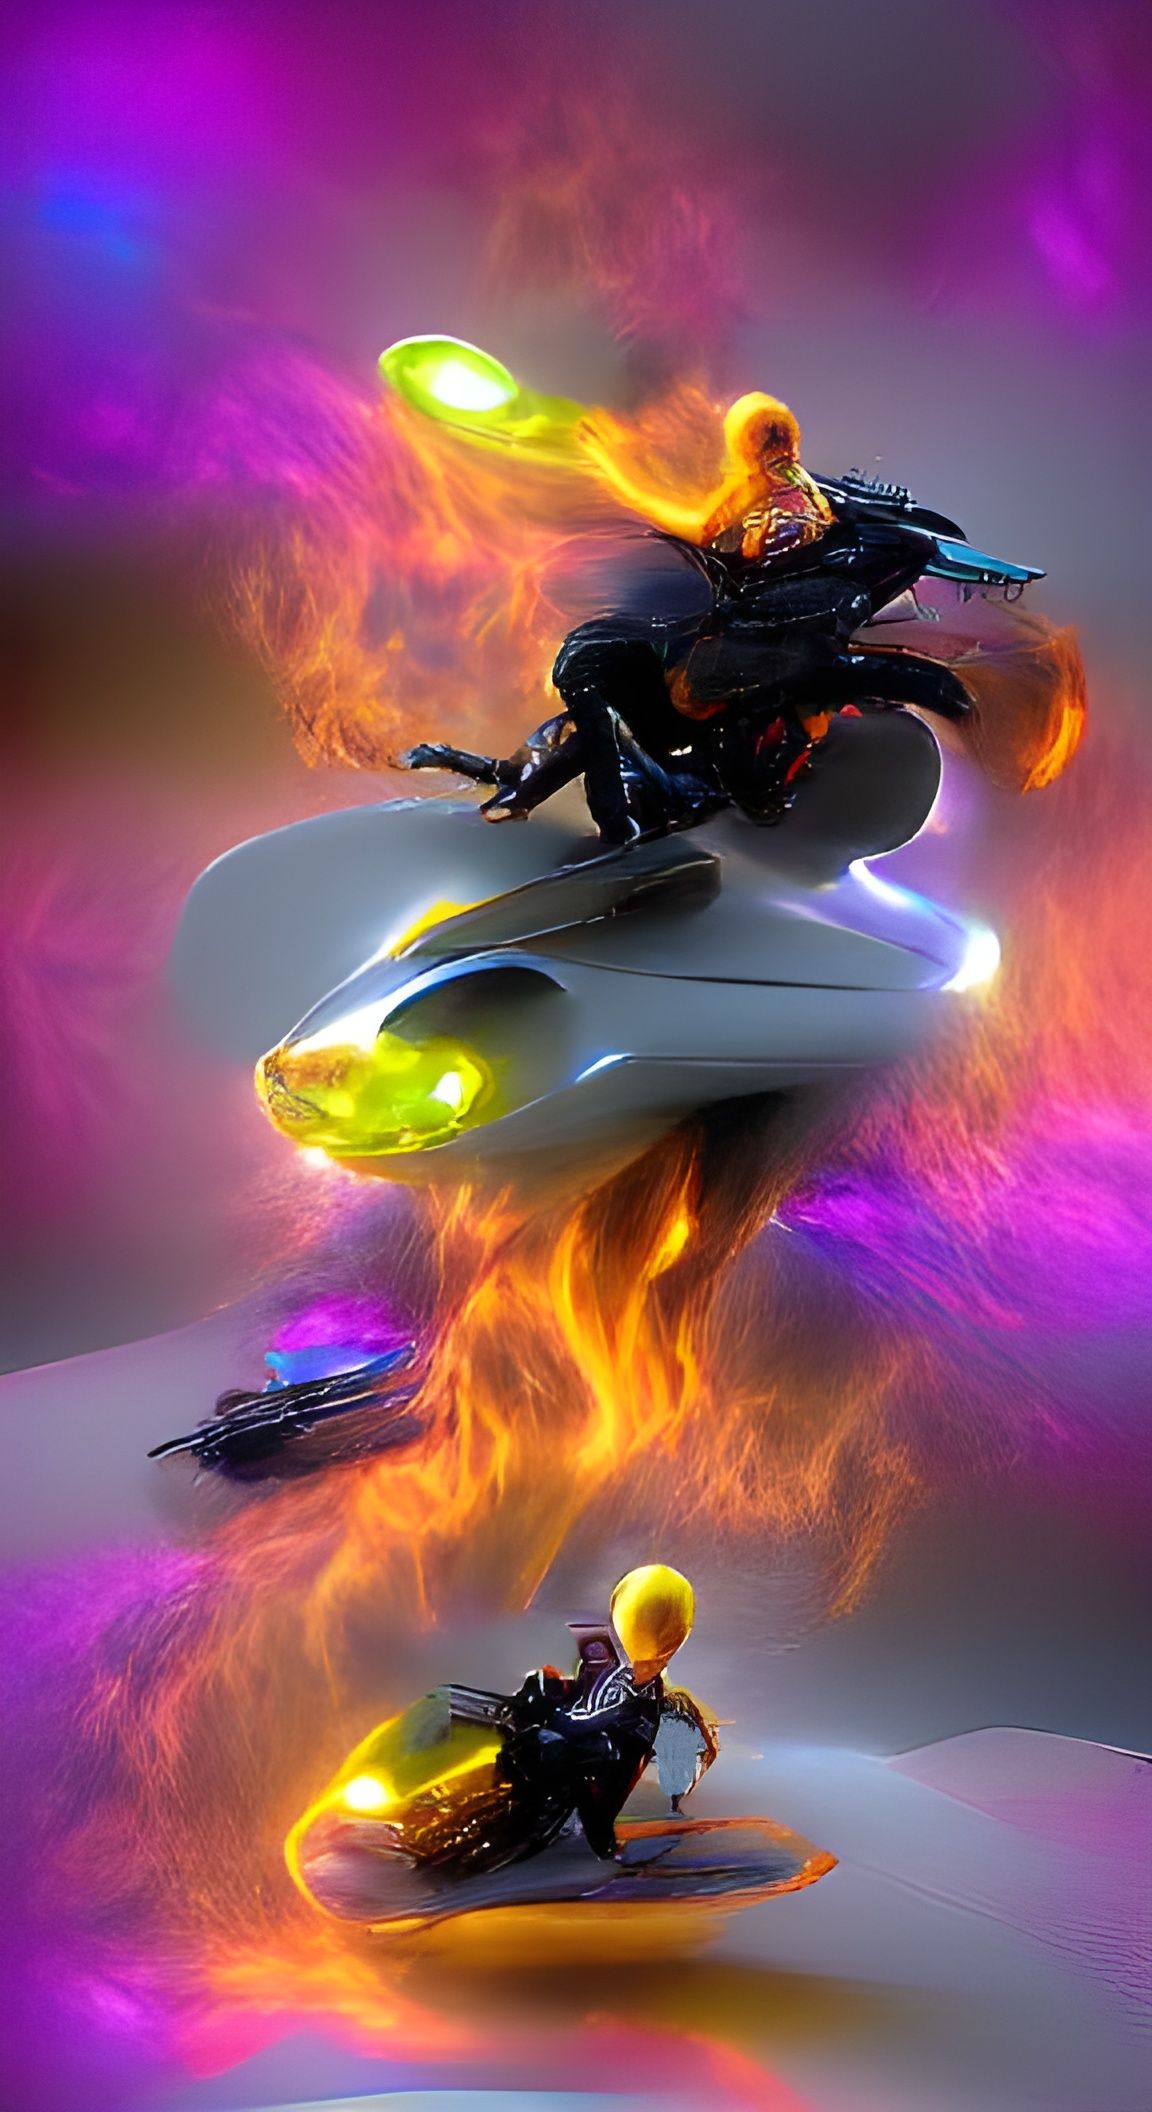 Space GhostRider On His Hellfire Hovermobile in Alpha Centauri 8K 3D 8k resolution ambient occlusion Behance HD beautifu...